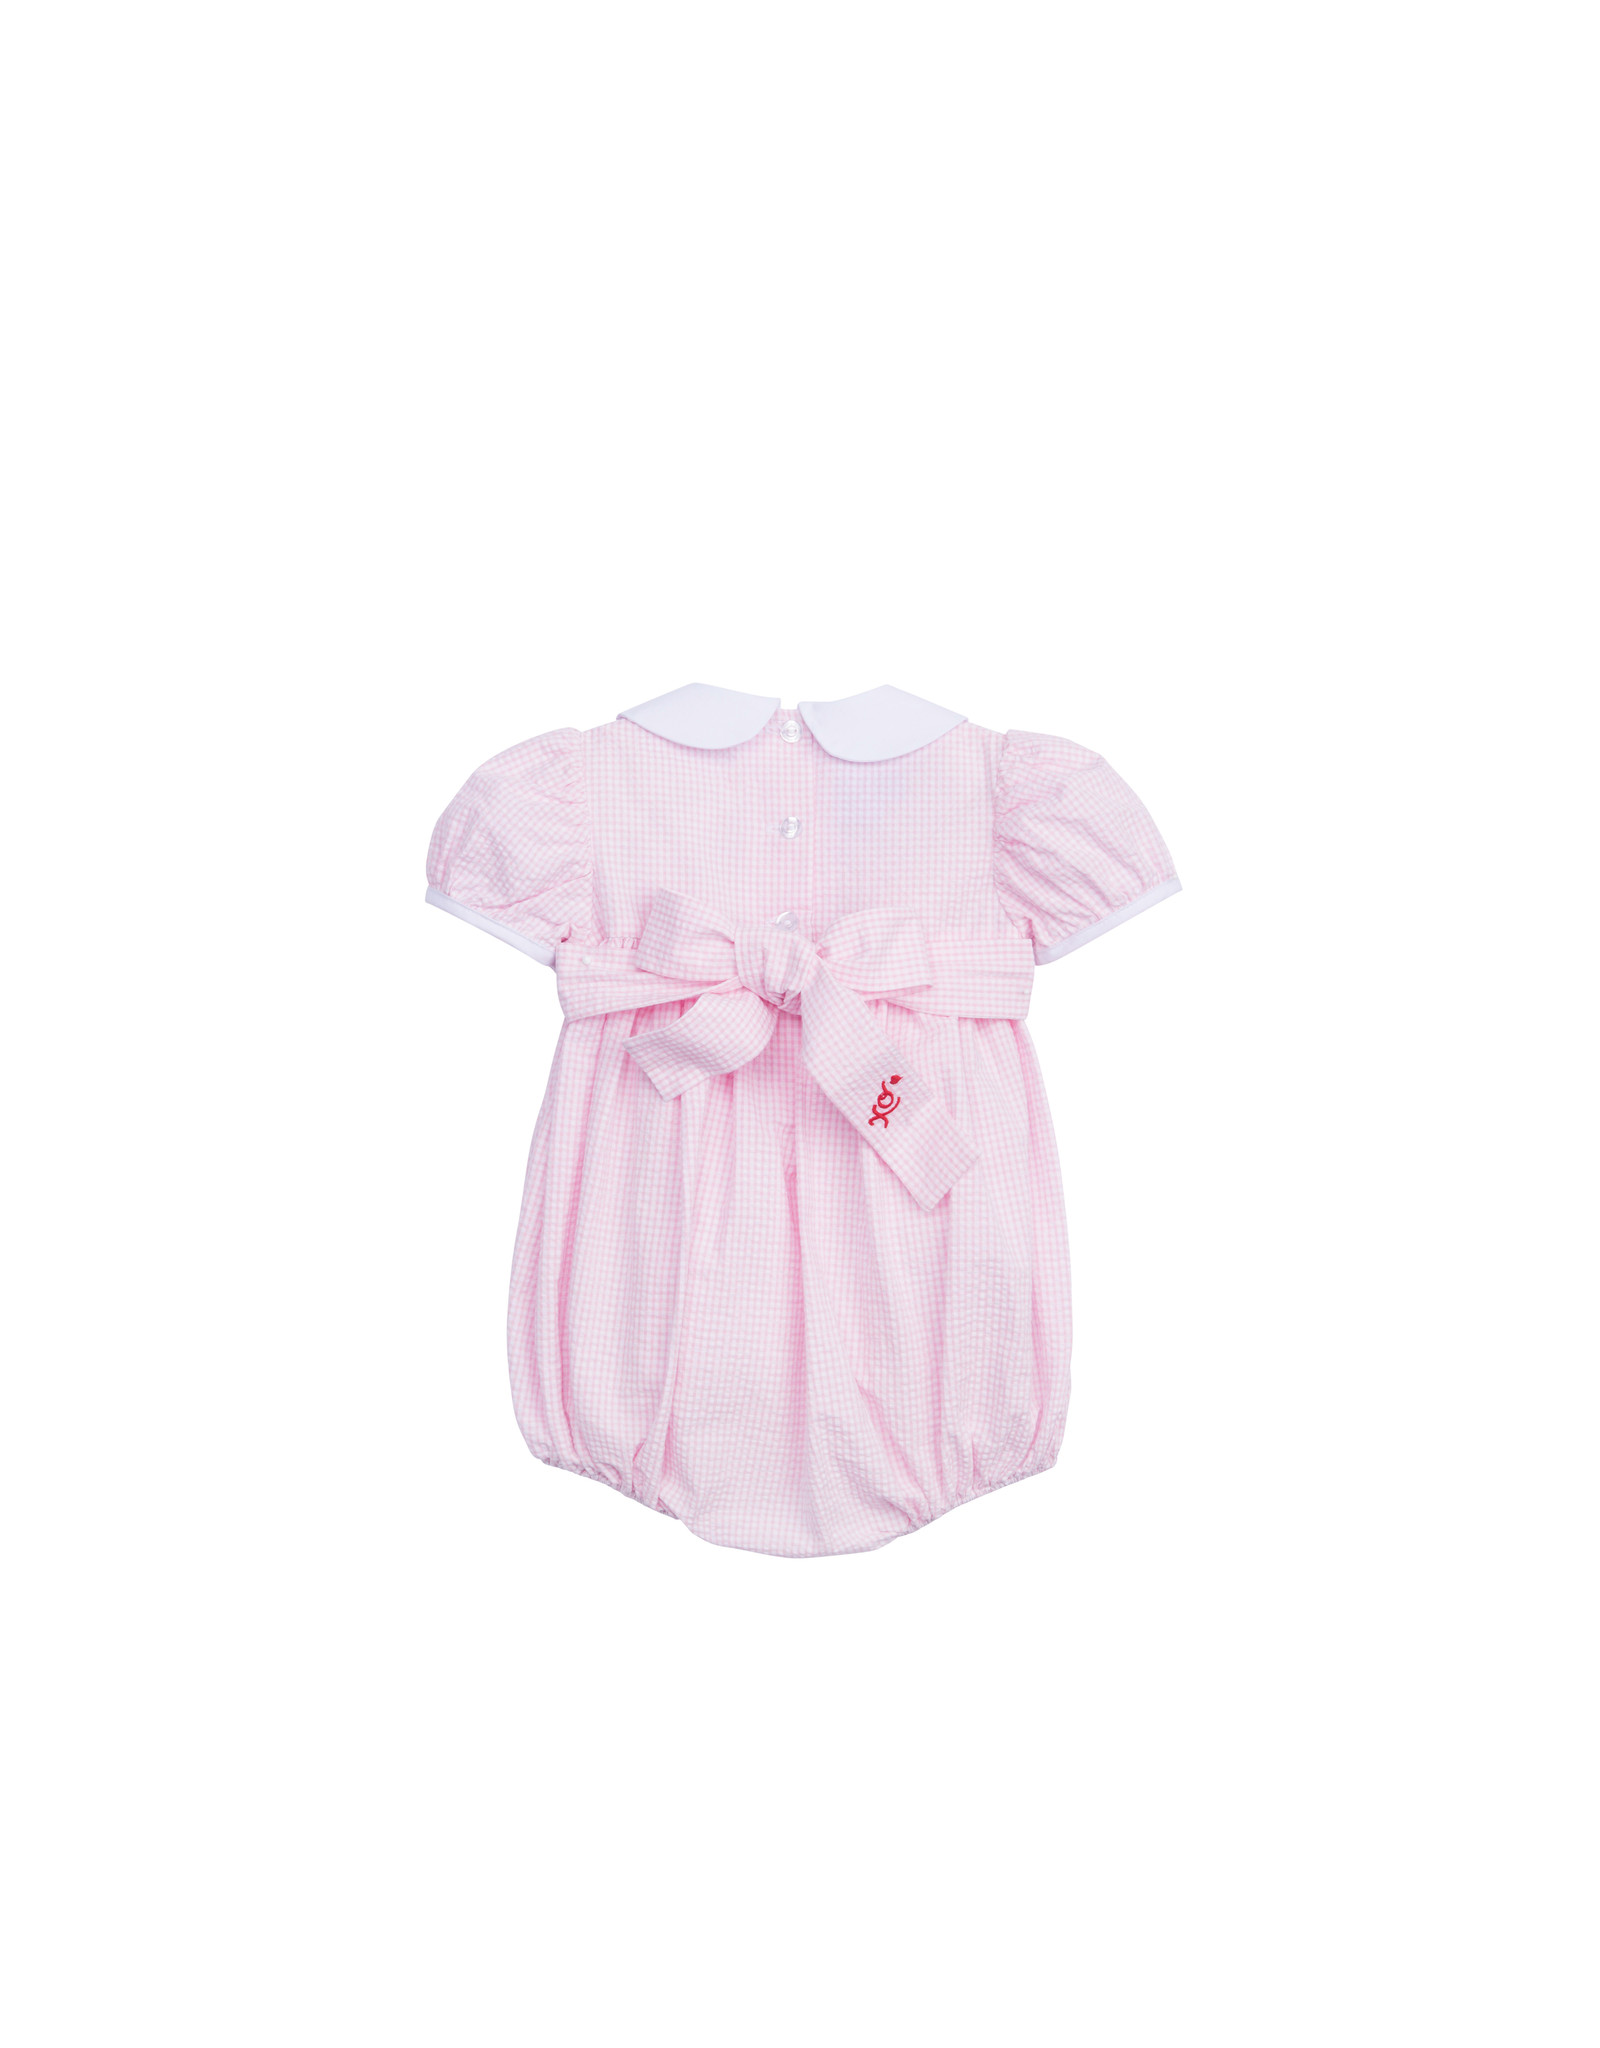 Little English Hearts Smocked Peter Pan Bubble